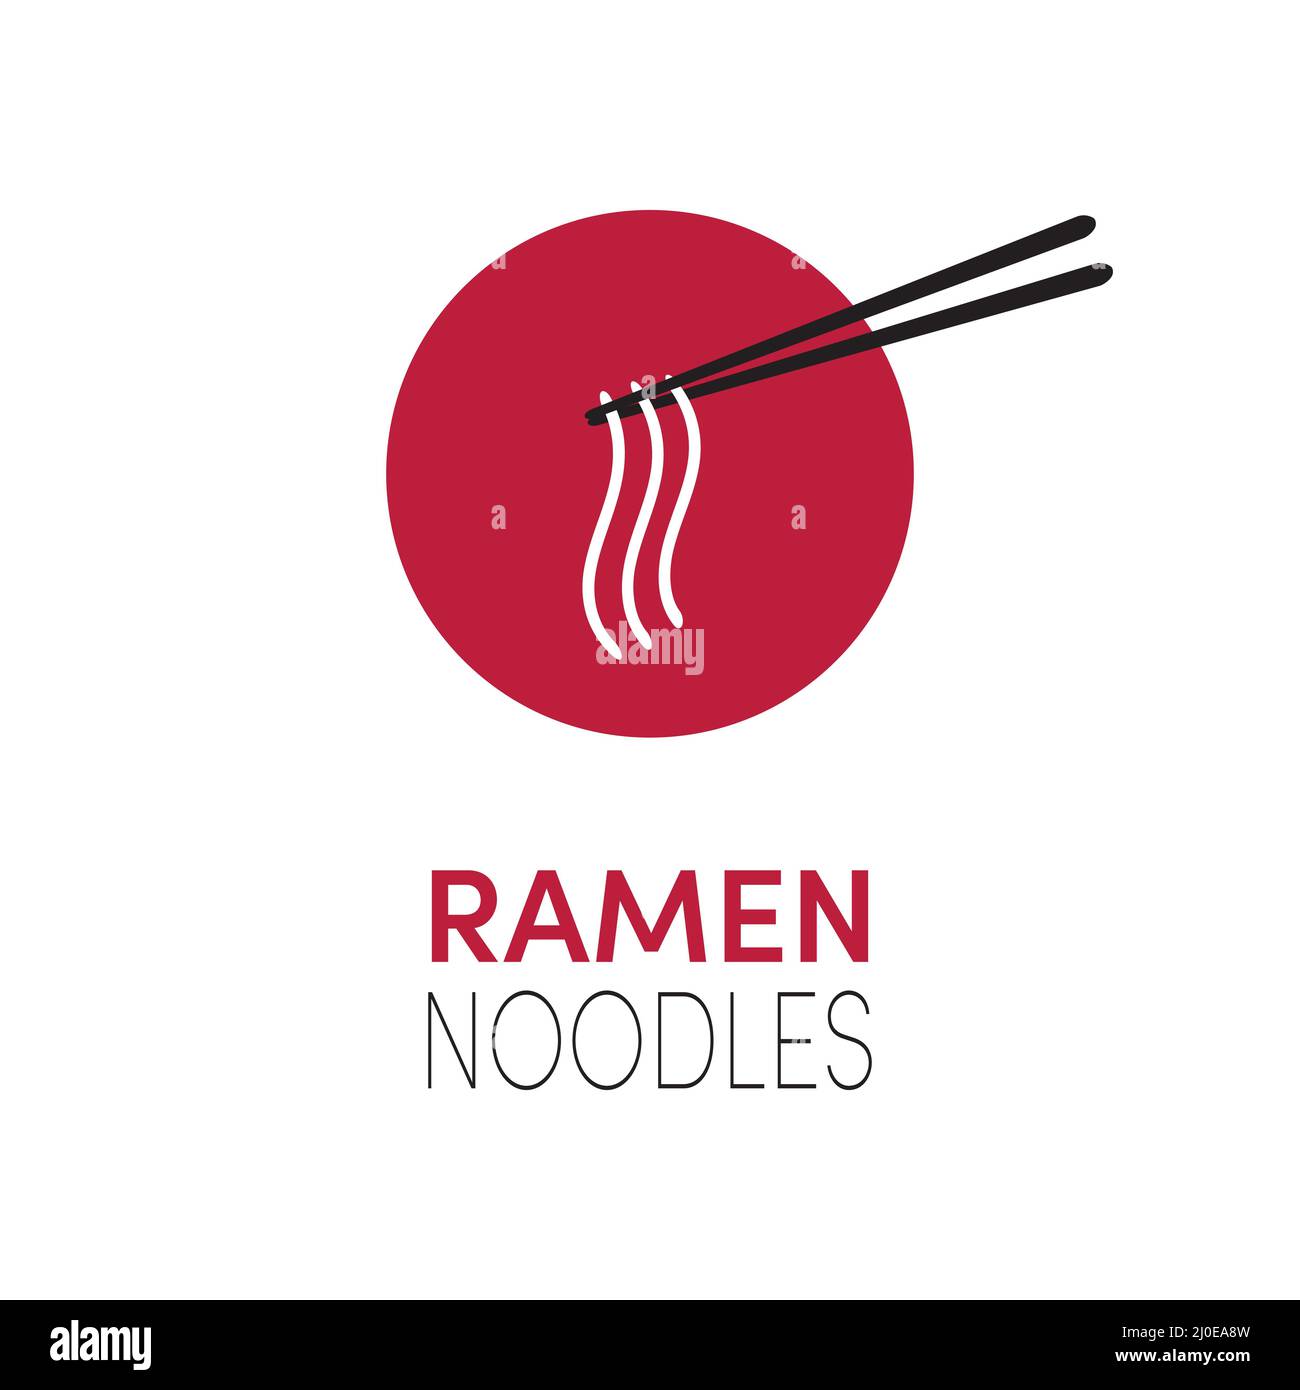 Ramen Noodles -Chopsticks with noodles and Japanese flag like background Stock Vector